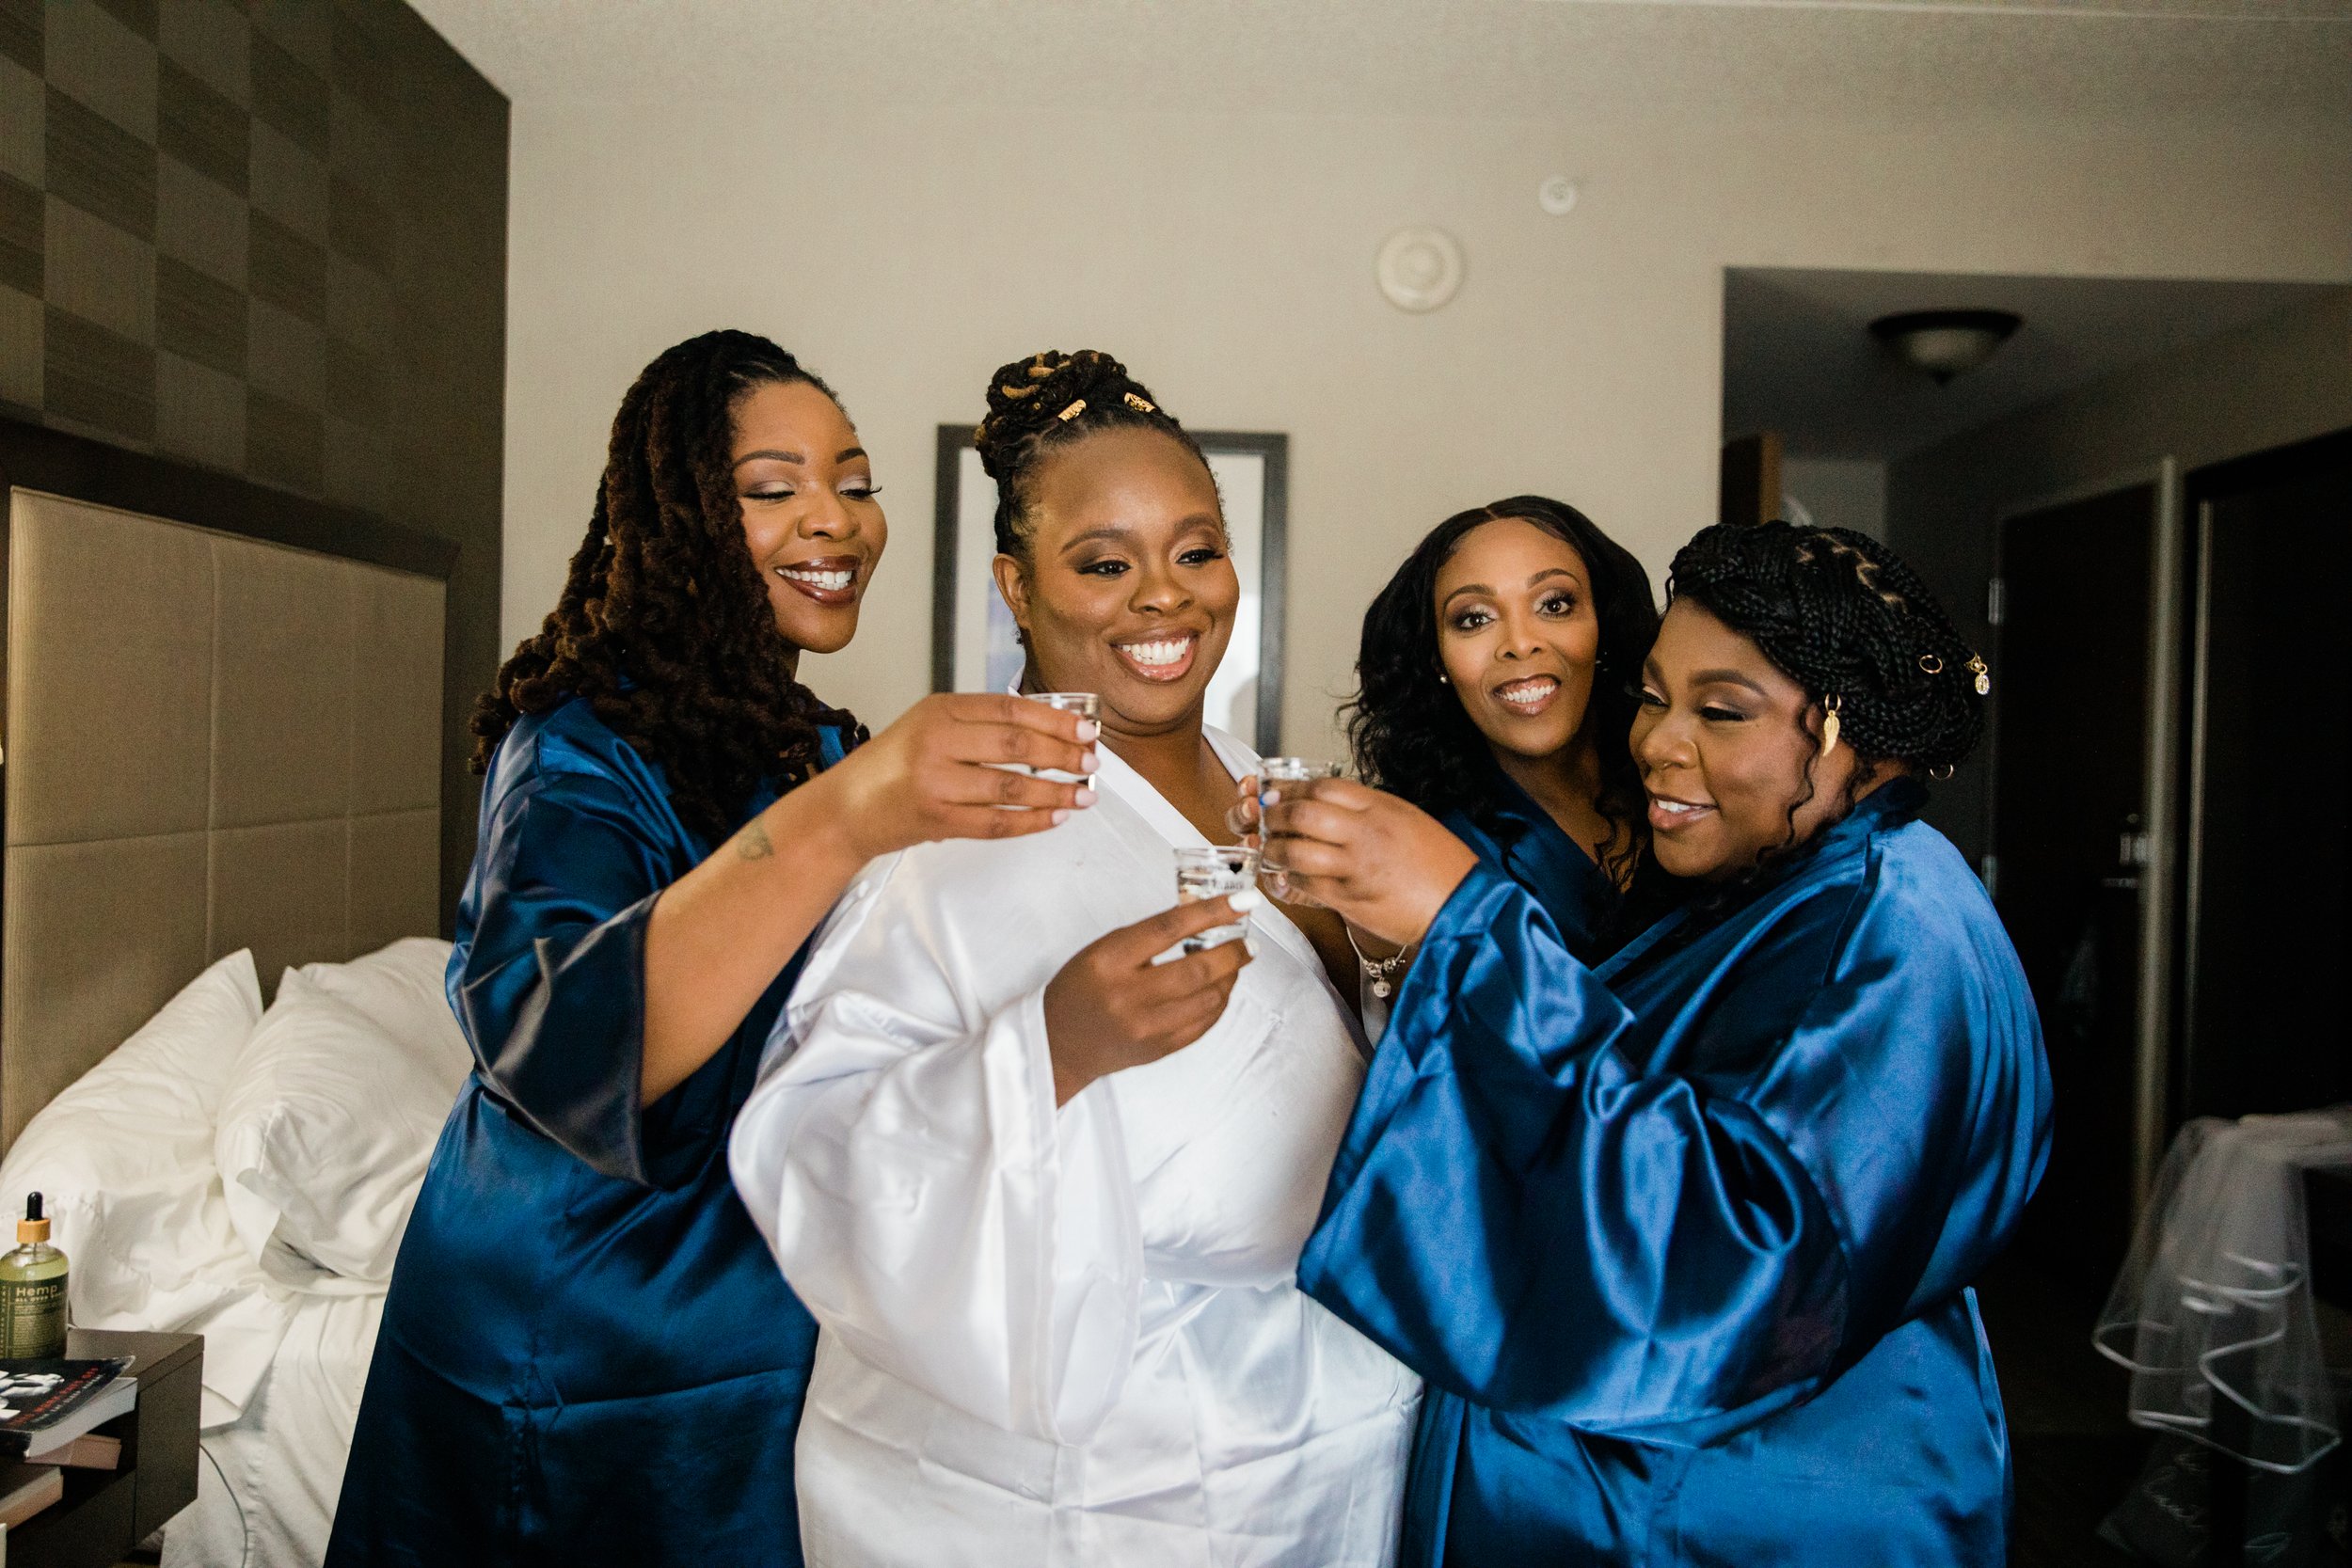 Harry Potter and Star Wars Themed Wedding at Martins West in Baltimore Maryland Shot by Megapixels Media Photography-8.jpg